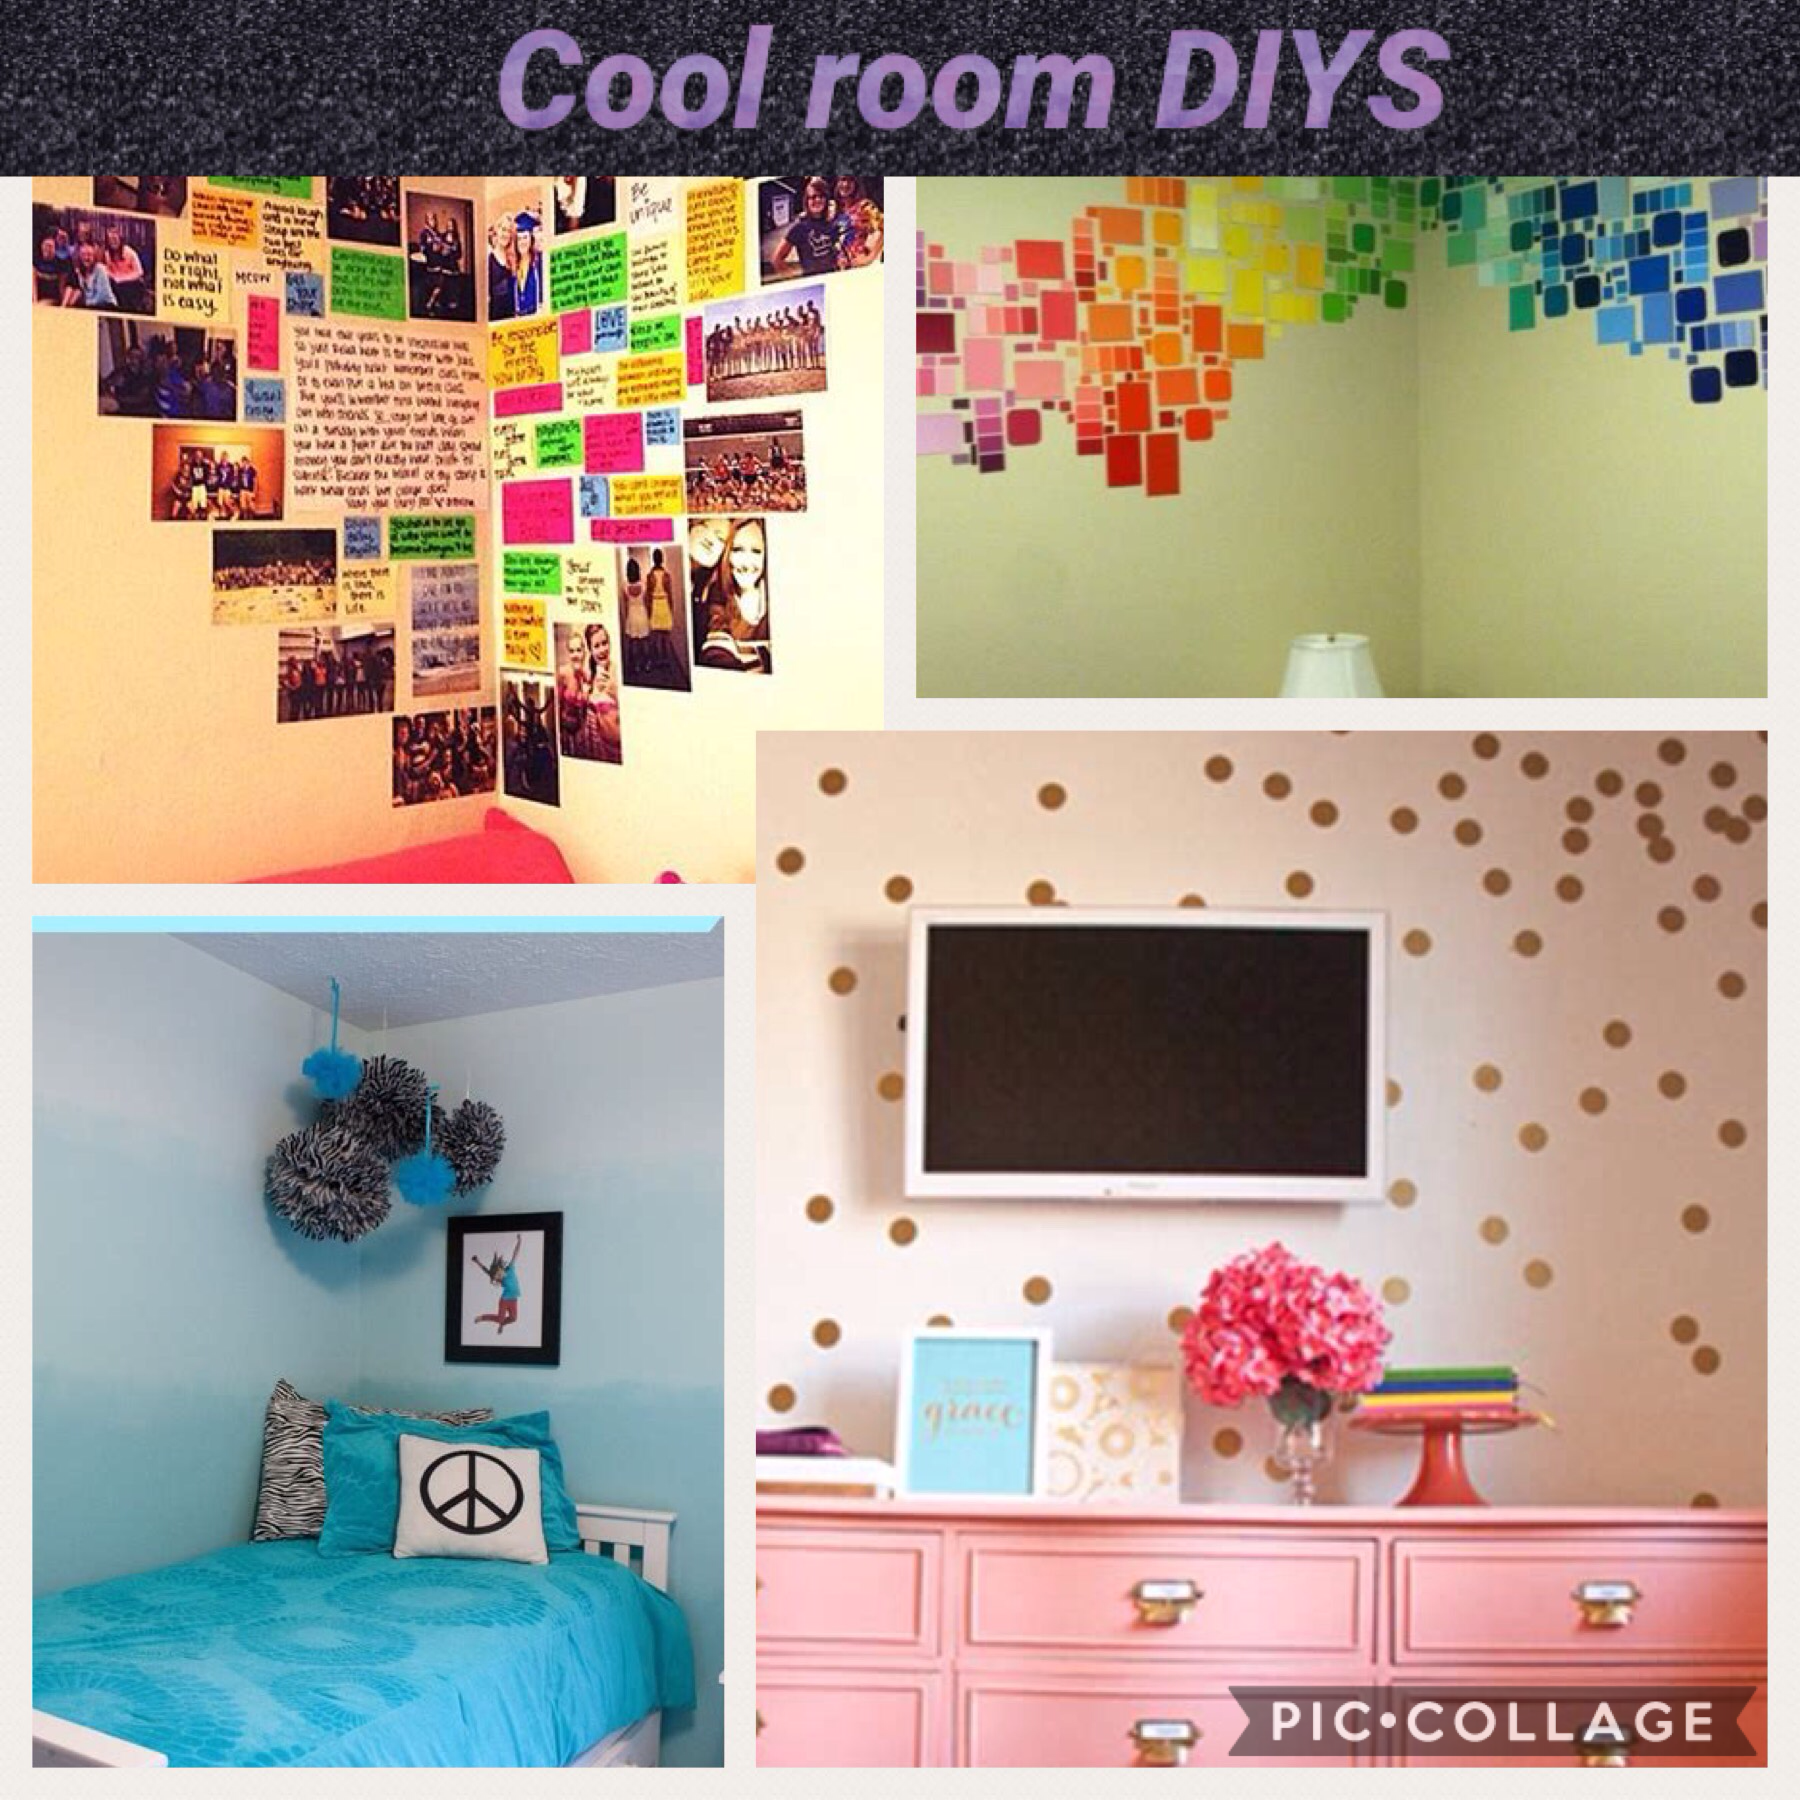 Style your room